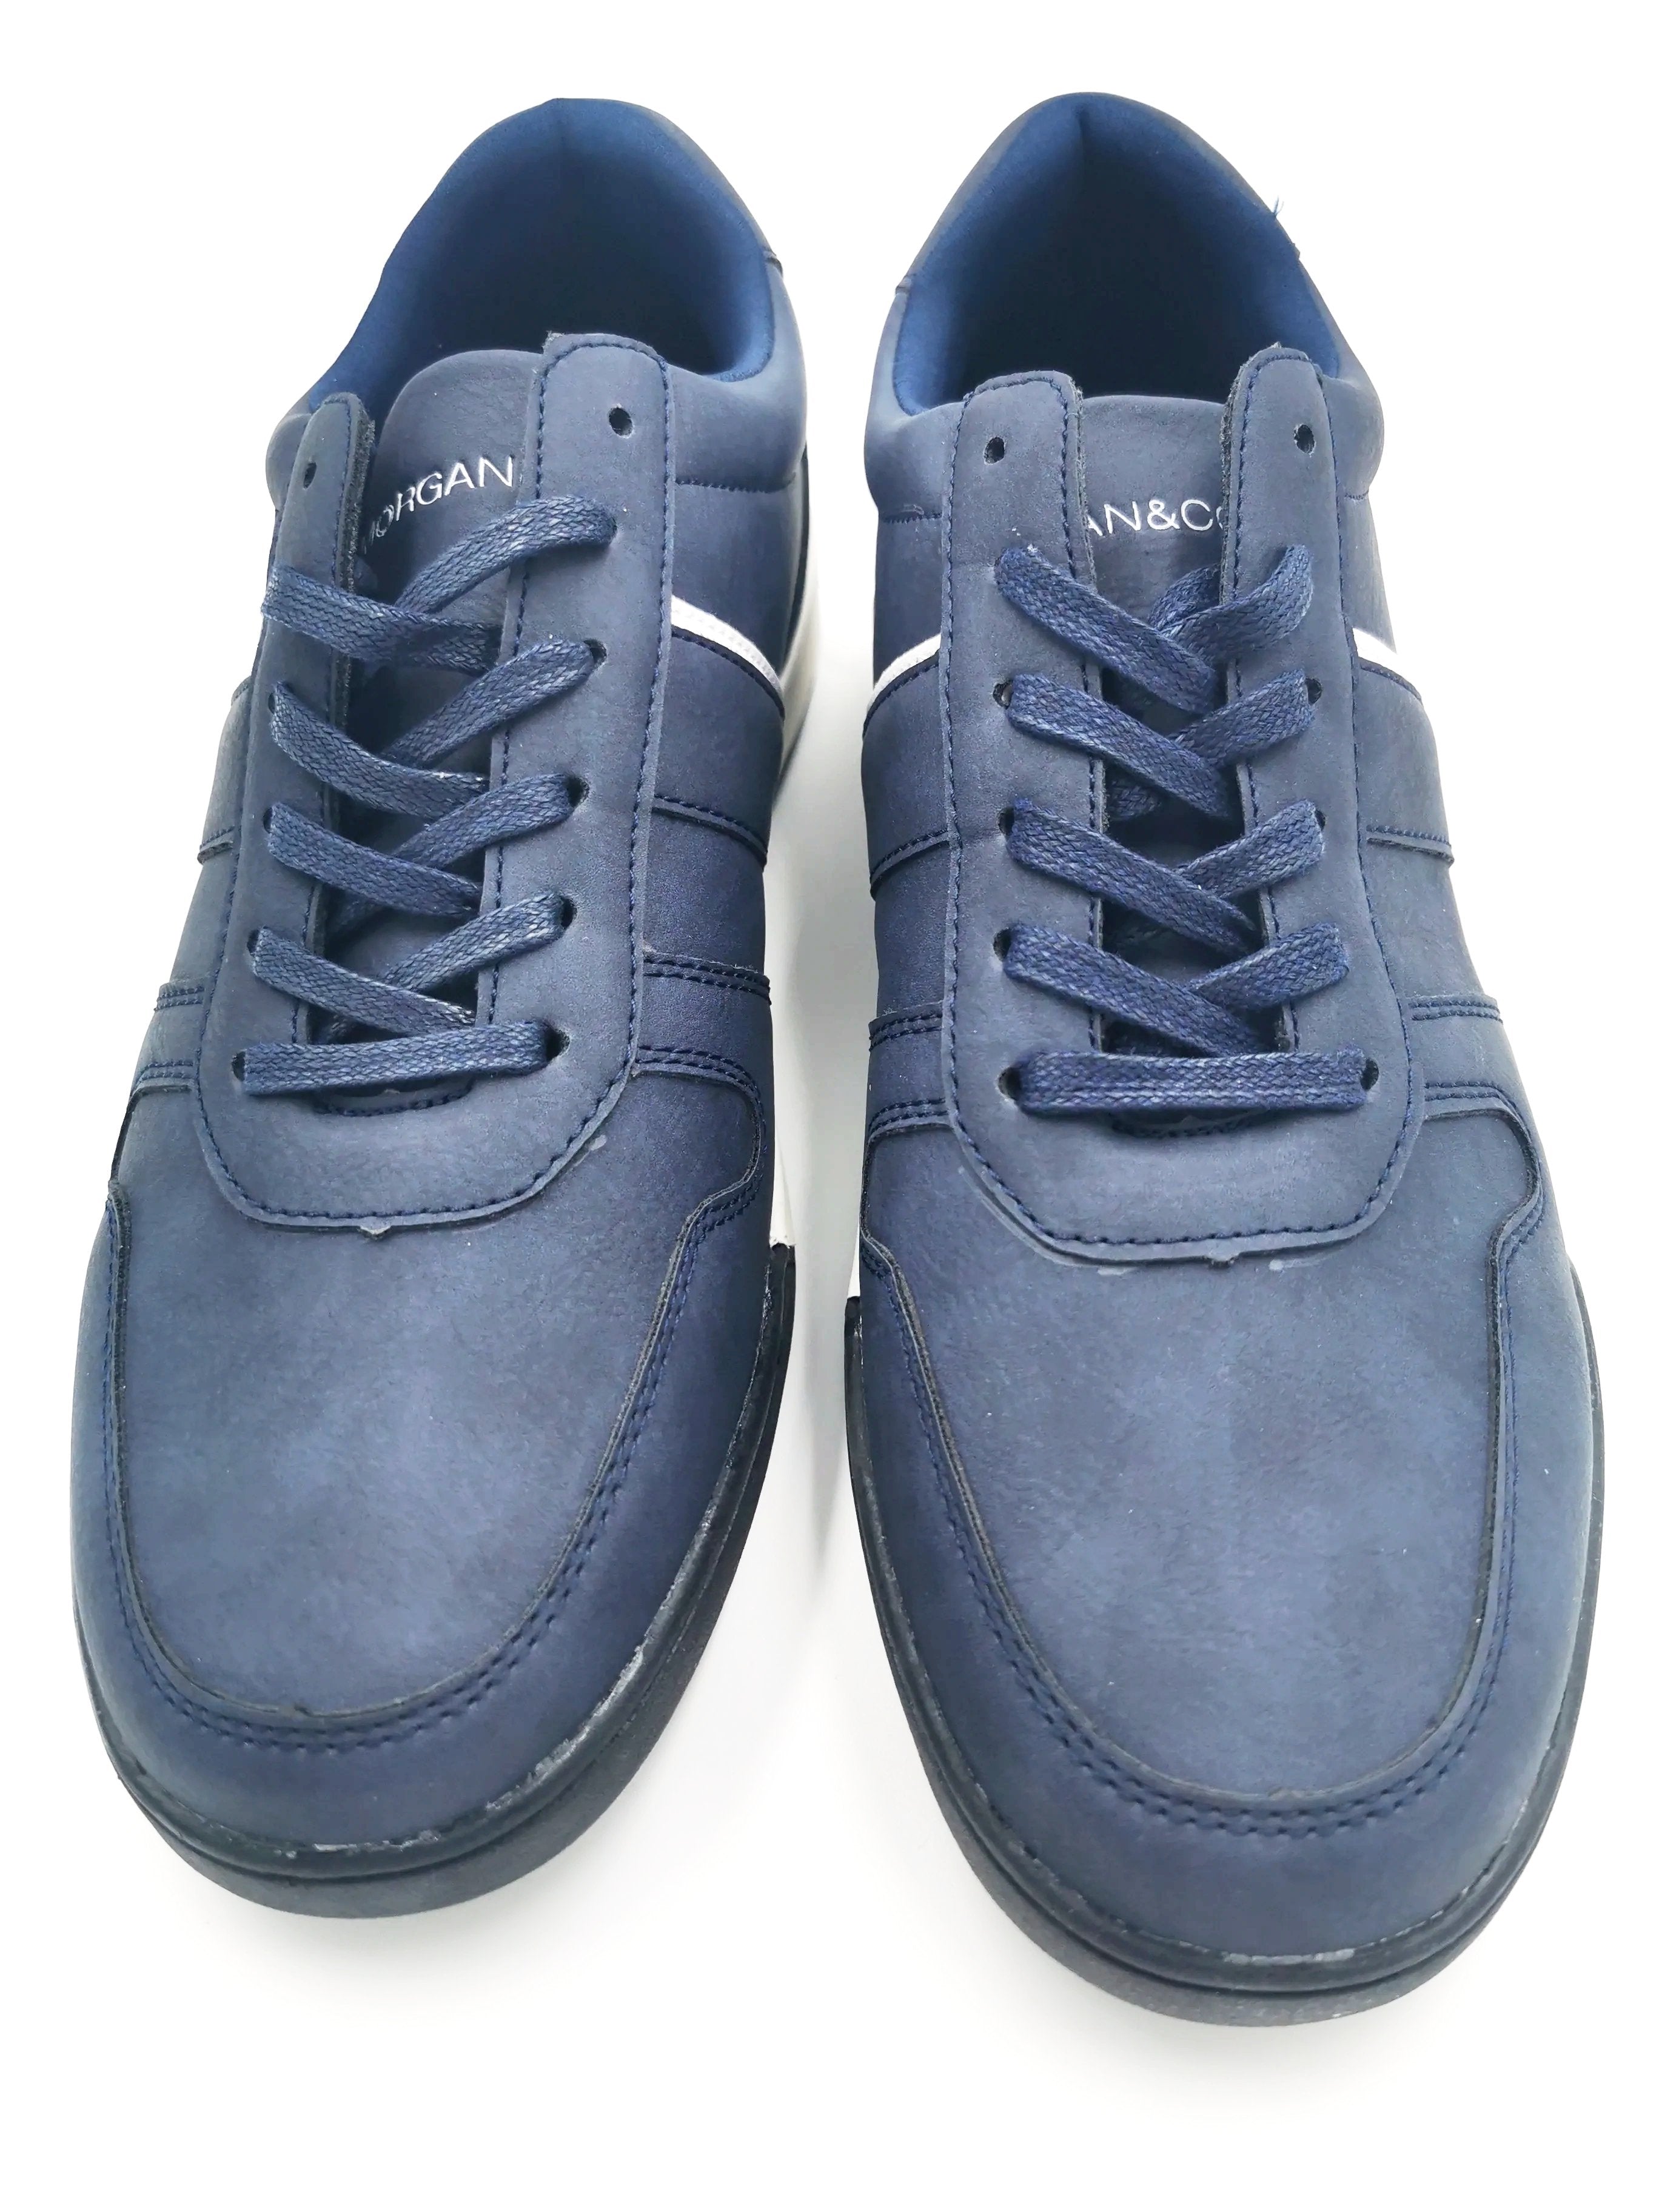 Morgan & Co. Faux Leather Navy Lace up Trainer/Runner-Top down view